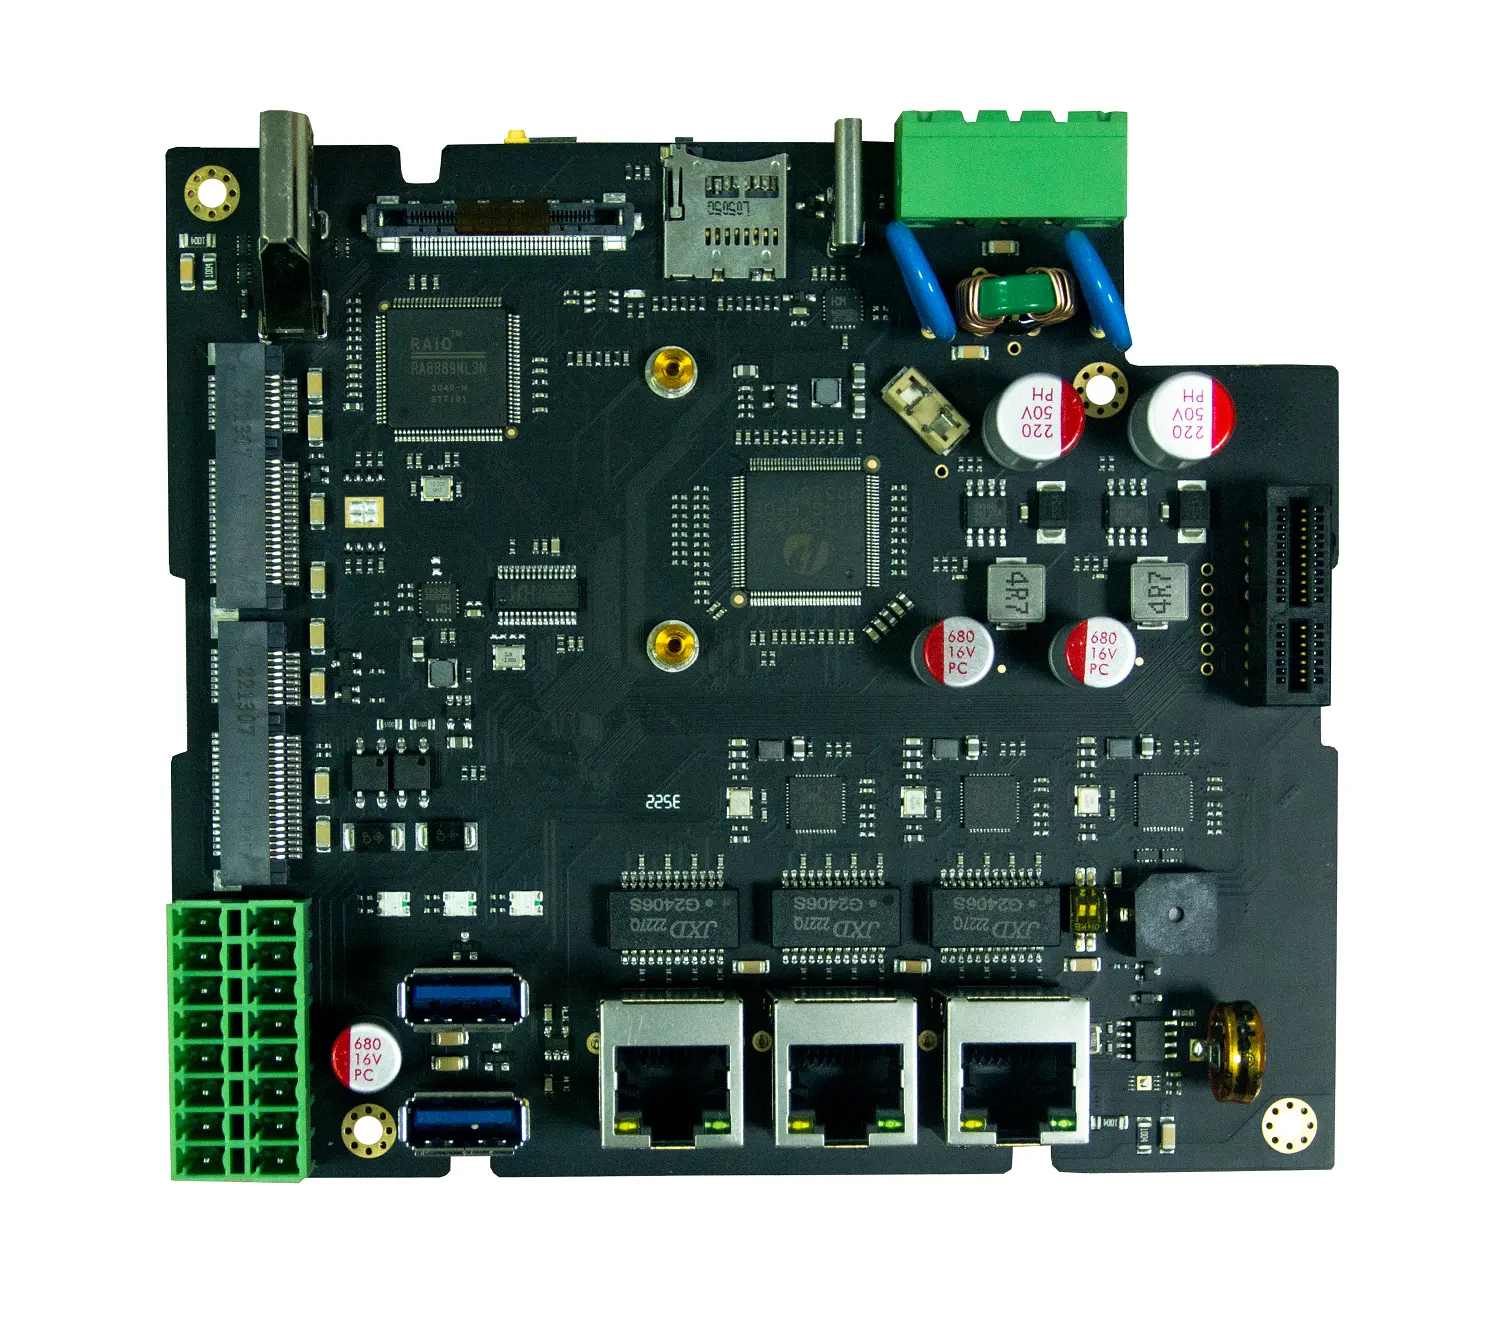 controller for power system application with RS485  RJ45  Mini PCIe socket with SIM card  USB 2.0Port  HDMI  DI  DO  CAN BUS